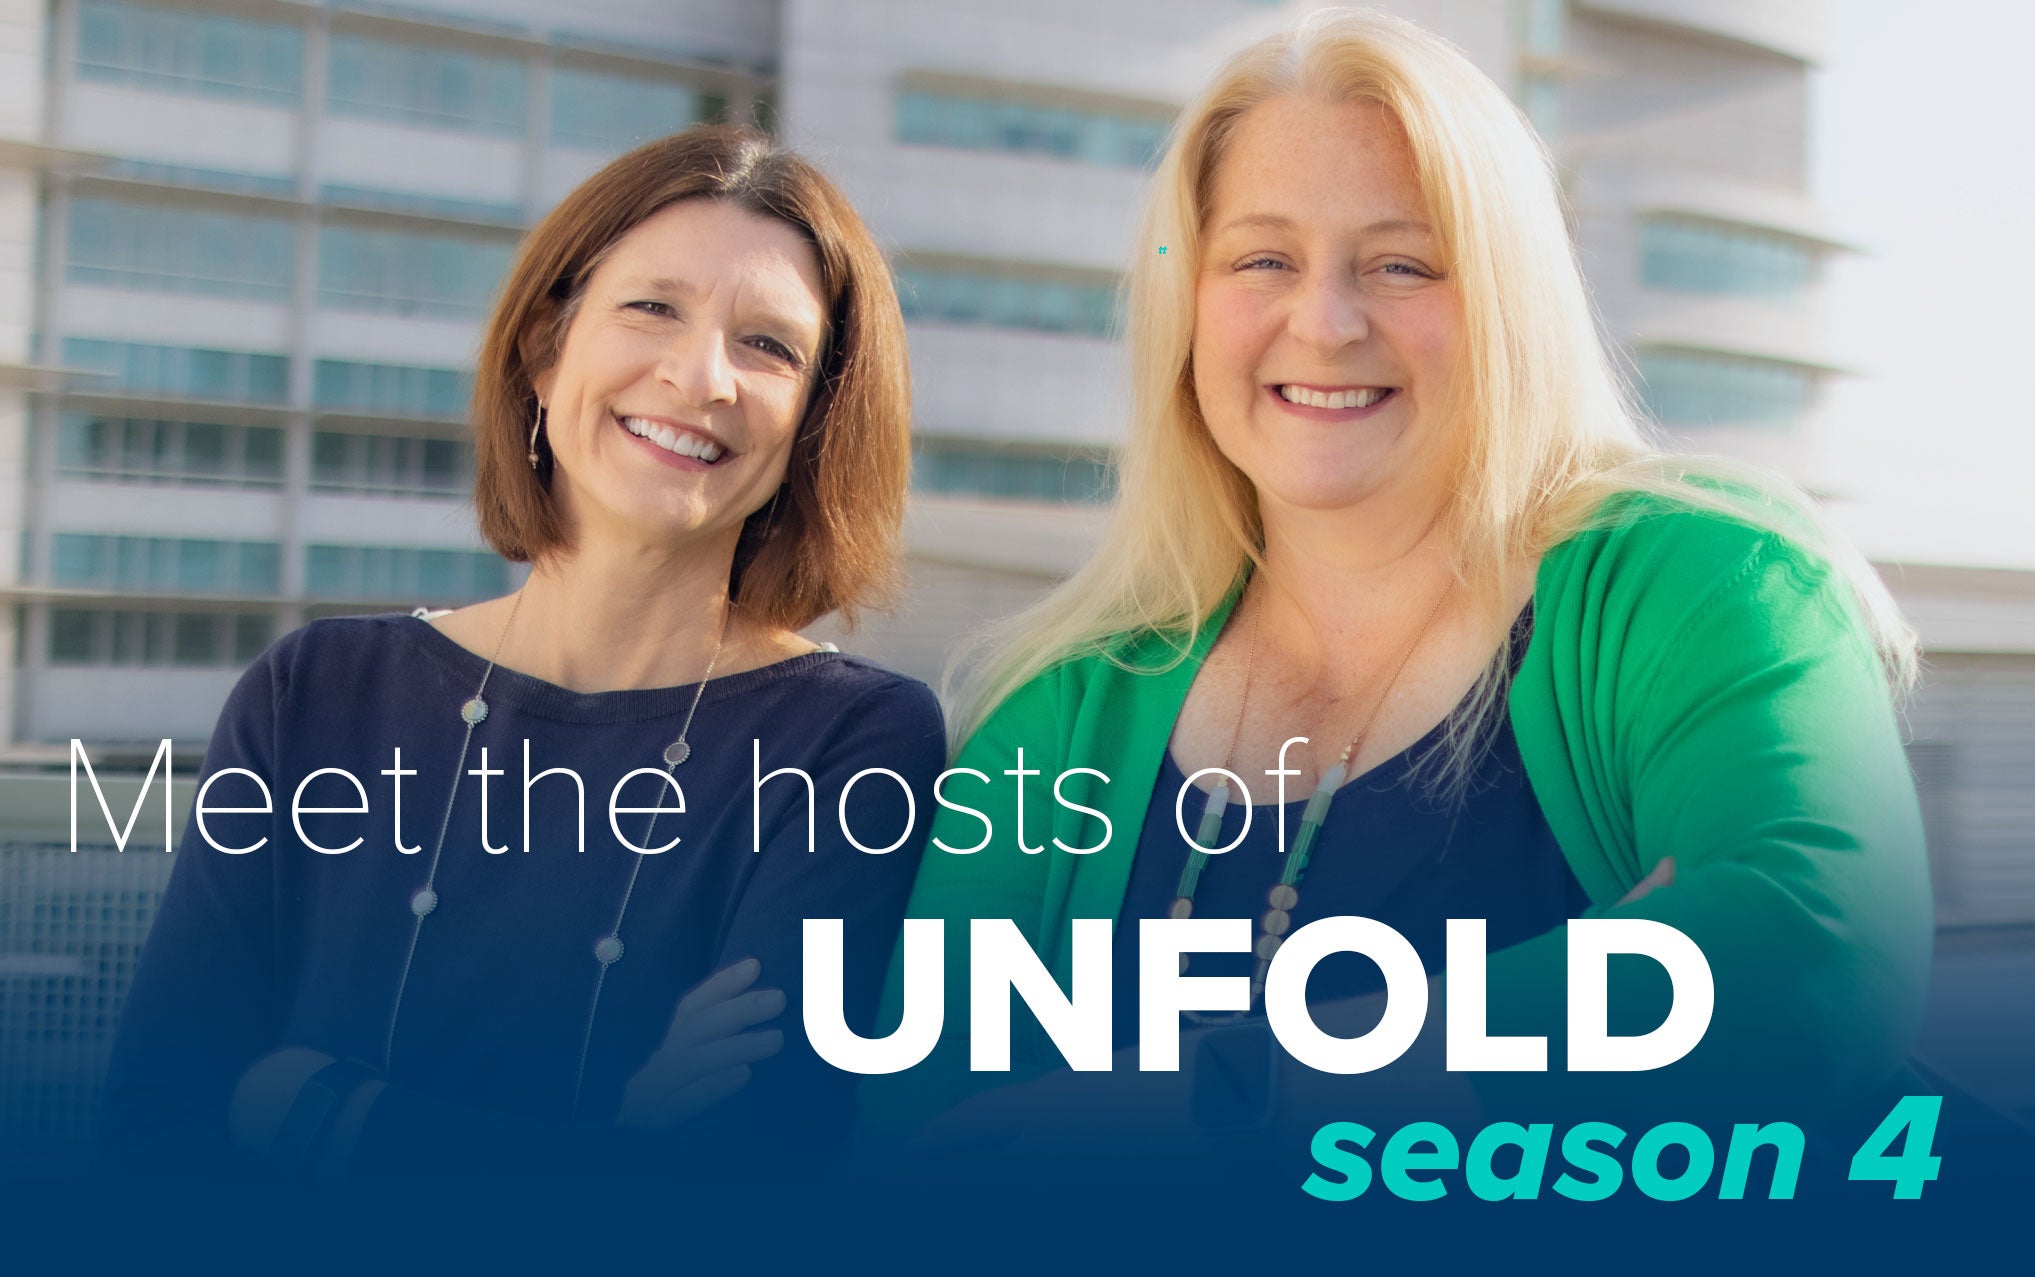 Portraits of 春色视频 Unfold Podcast Season 4 Hosts Amy Quinton and Marianne Russ Sharp